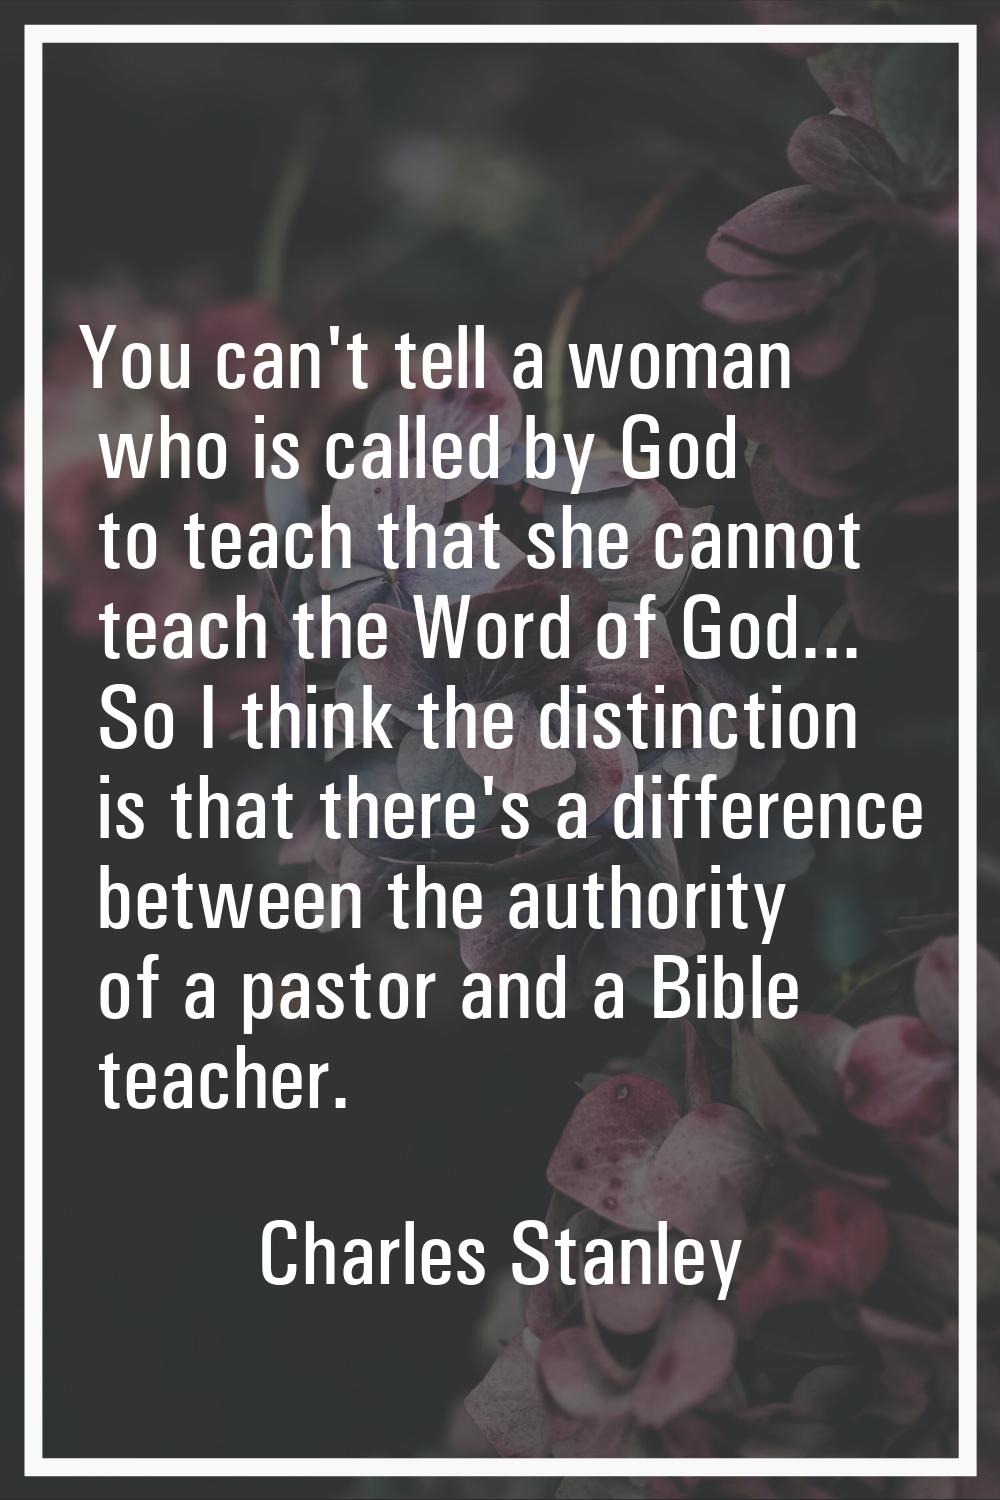 You can't tell a woman who is called by God to teach that she cannot teach the Word of God... So I 